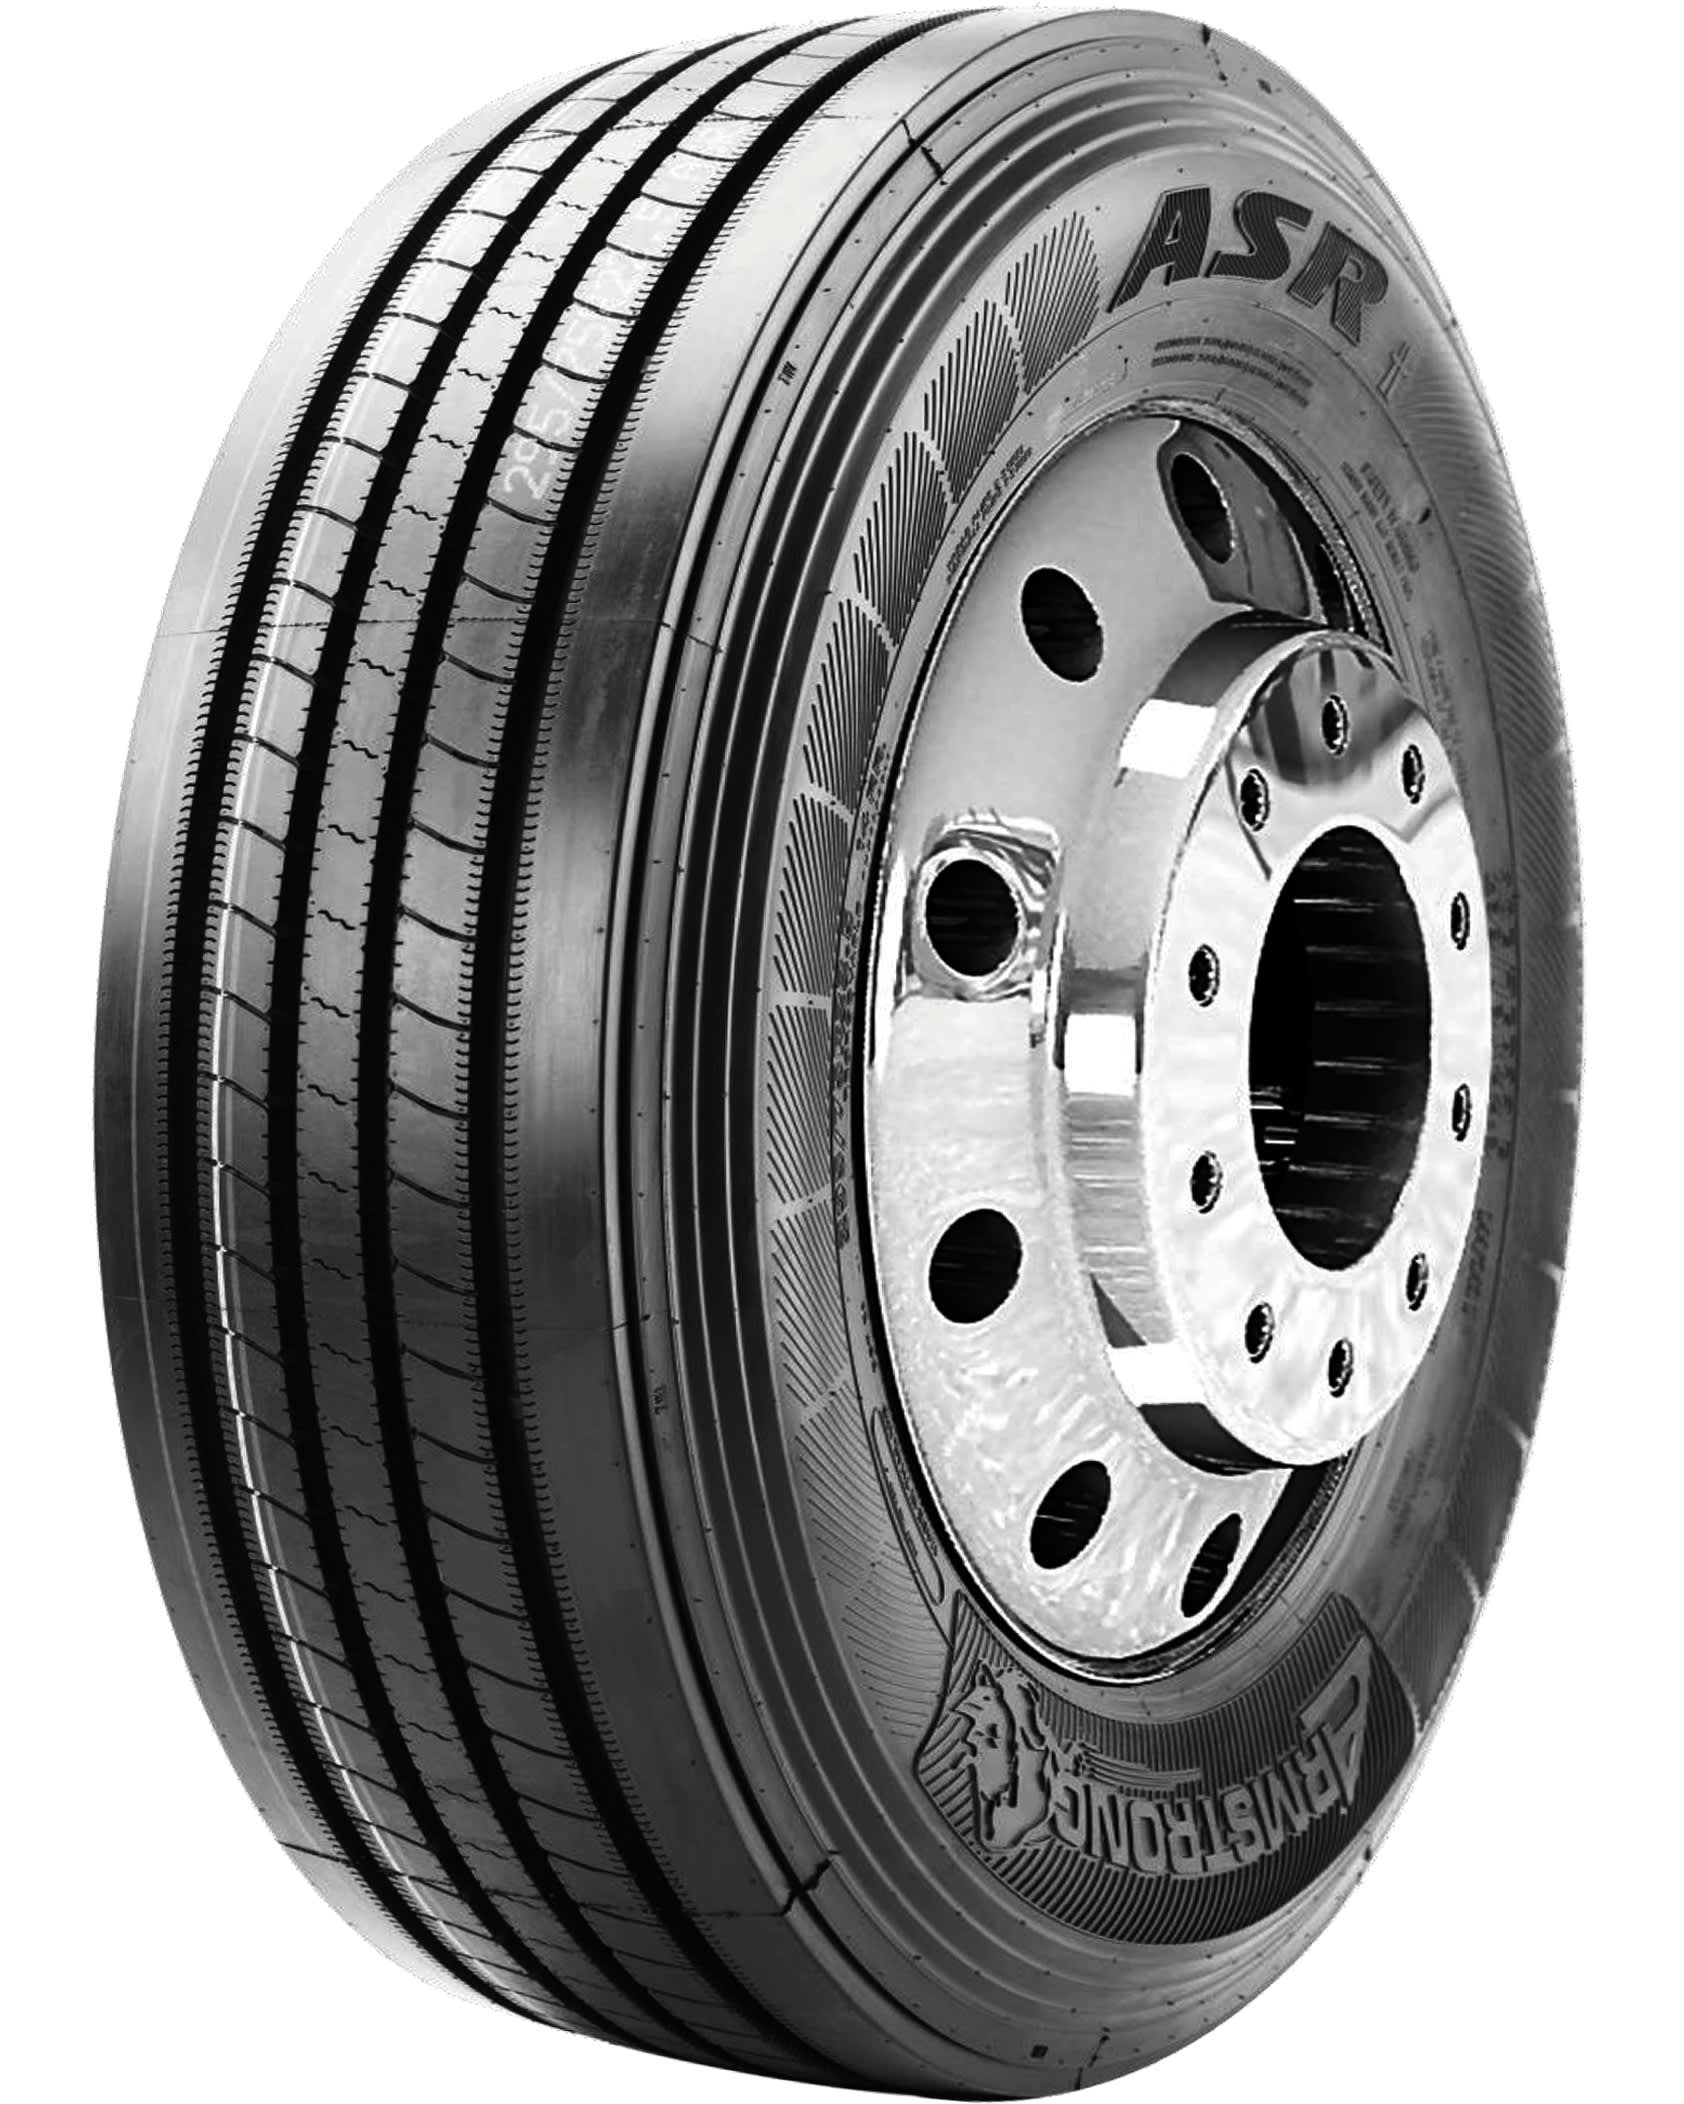 buy-armstrong-asr-tires-online-simpletire